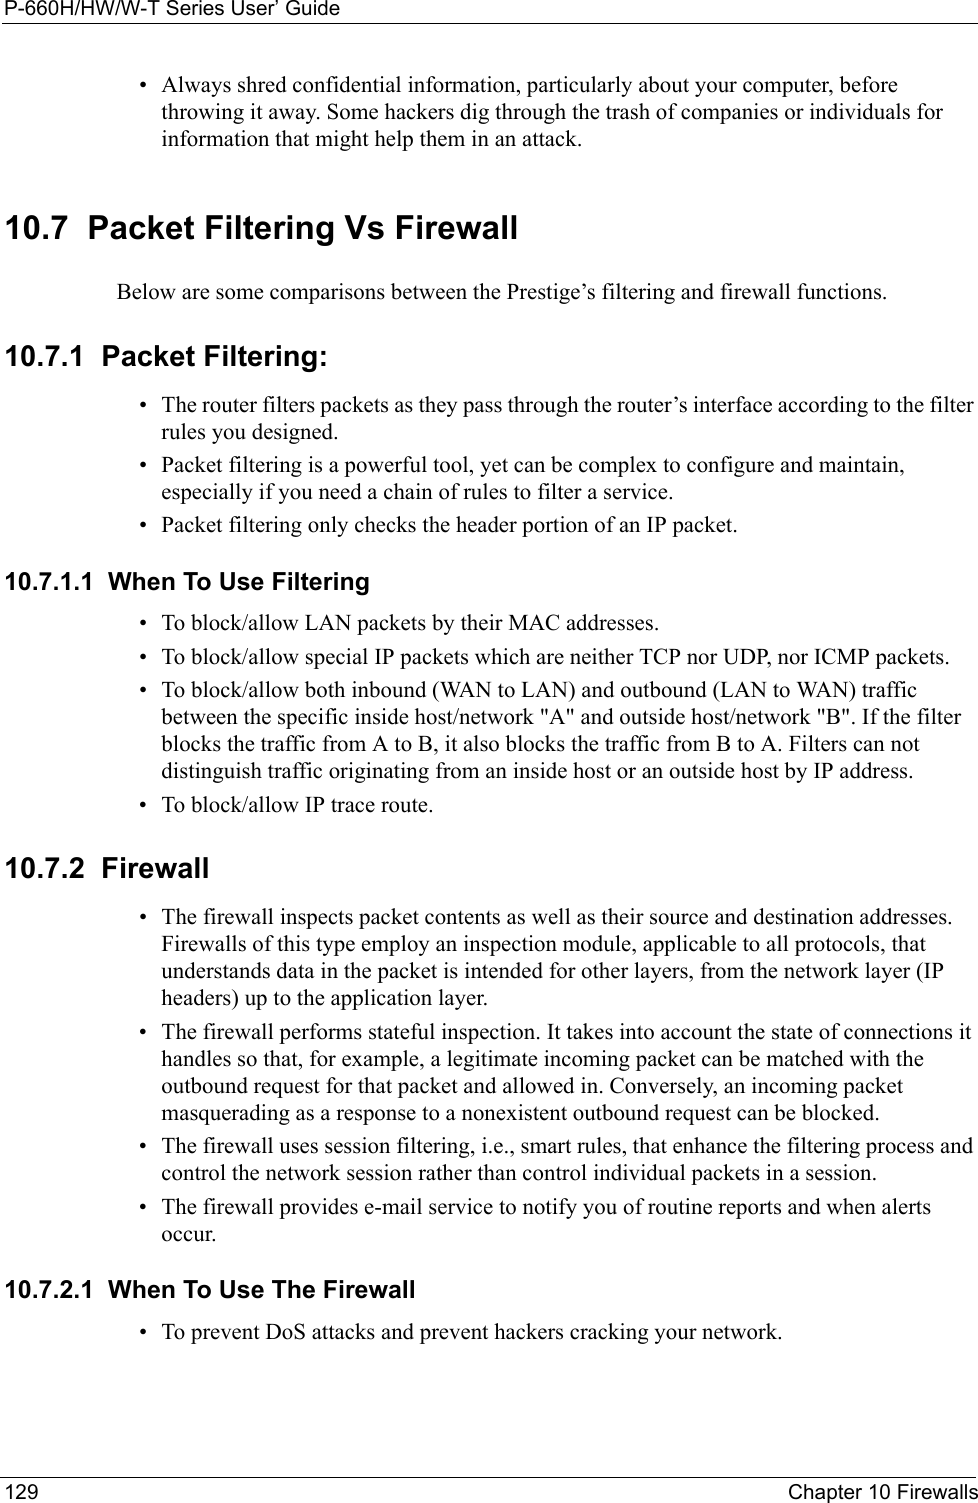 P-660H/HW/W-T Series User’ Guide129 Chapter 10 Firewalls• Always shred confidential information, particularly about your computer, before throwing it away. Some hackers dig through the trash of companies or individuals for information that might help them in an attack.10.7  Packet Filtering Vs FirewallBelow are some comparisons between the Prestige’s filtering and firewall functions.10.7.1  Packet Filtering:• The router filters packets as they pass through the router’s interface according to the filter rules you designed.• Packet filtering is a powerful tool, yet can be complex to configure and maintain, especially if you need a chain of rules to filter a service.• Packet filtering only checks the header portion of an IP packet.10.7.1.1  When To Use Filtering• To block/allow LAN packets by their MAC addresses.• To block/allow special IP packets which are neither TCP nor UDP, nor ICMP packets.• To block/allow both inbound (WAN to LAN) and outbound (LAN to WAN) traffic between the specific inside host/network &quot;A&quot; and outside host/network &quot;B&quot;. If the filter blocks the traffic from A to B, it also blocks the traffic from B to A. Filters can not distinguish traffic originating from an inside host or an outside host by IP address.• To block/allow IP trace route.10.7.2  Firewall• The firewall inspects packet contents as well as their source and destination addresses. Firewalls of this type employ an inspection module, applicable to all protocols, that understands data in the packet is intended for other layers, from the network layer (IP headers) up to the application layer.• The firewall performs stateful inspection. It takes into account the state of connections it handles so that, for example, a legitimate incoming packet can be matched with the outbound request for that packet and allowed in. Conversely, an incoming packet masquerading as a response to a nonexistent outbound request can be blocked.• The firewall uses session filtering, i.e., smart rules, that enhance the filtering process and control the network session rather than control individual packets in a session.• The firewall provides e-mail service to notify you of routine reports and when alerts occur.10.7.2.1  When To Use The Firewall• To prevent DoS attacks and prevent hackers cracking your network.